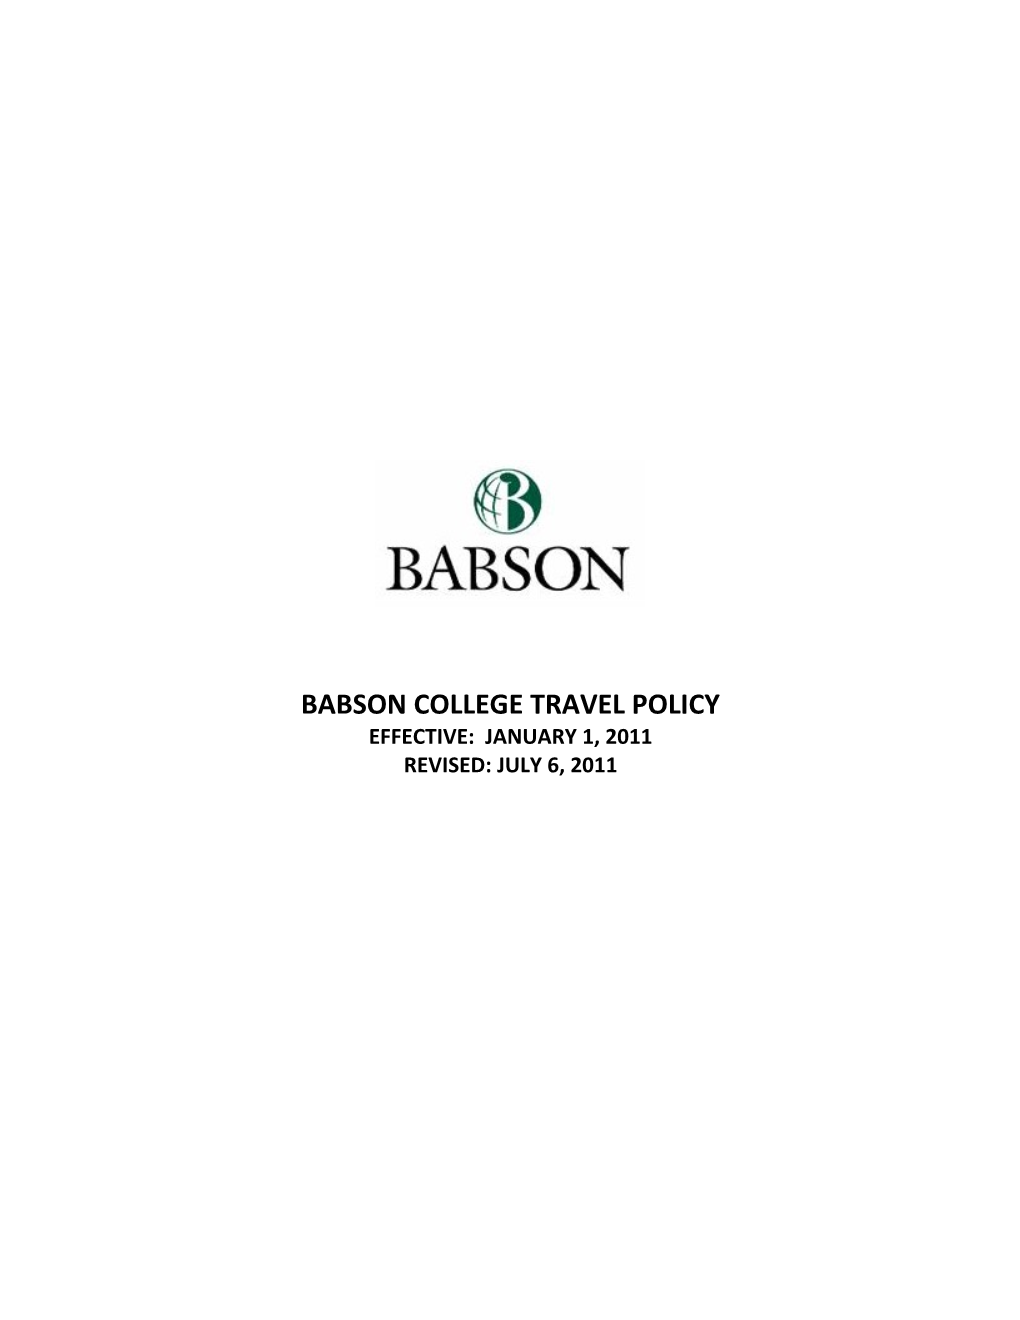 Babson College Travel Policy